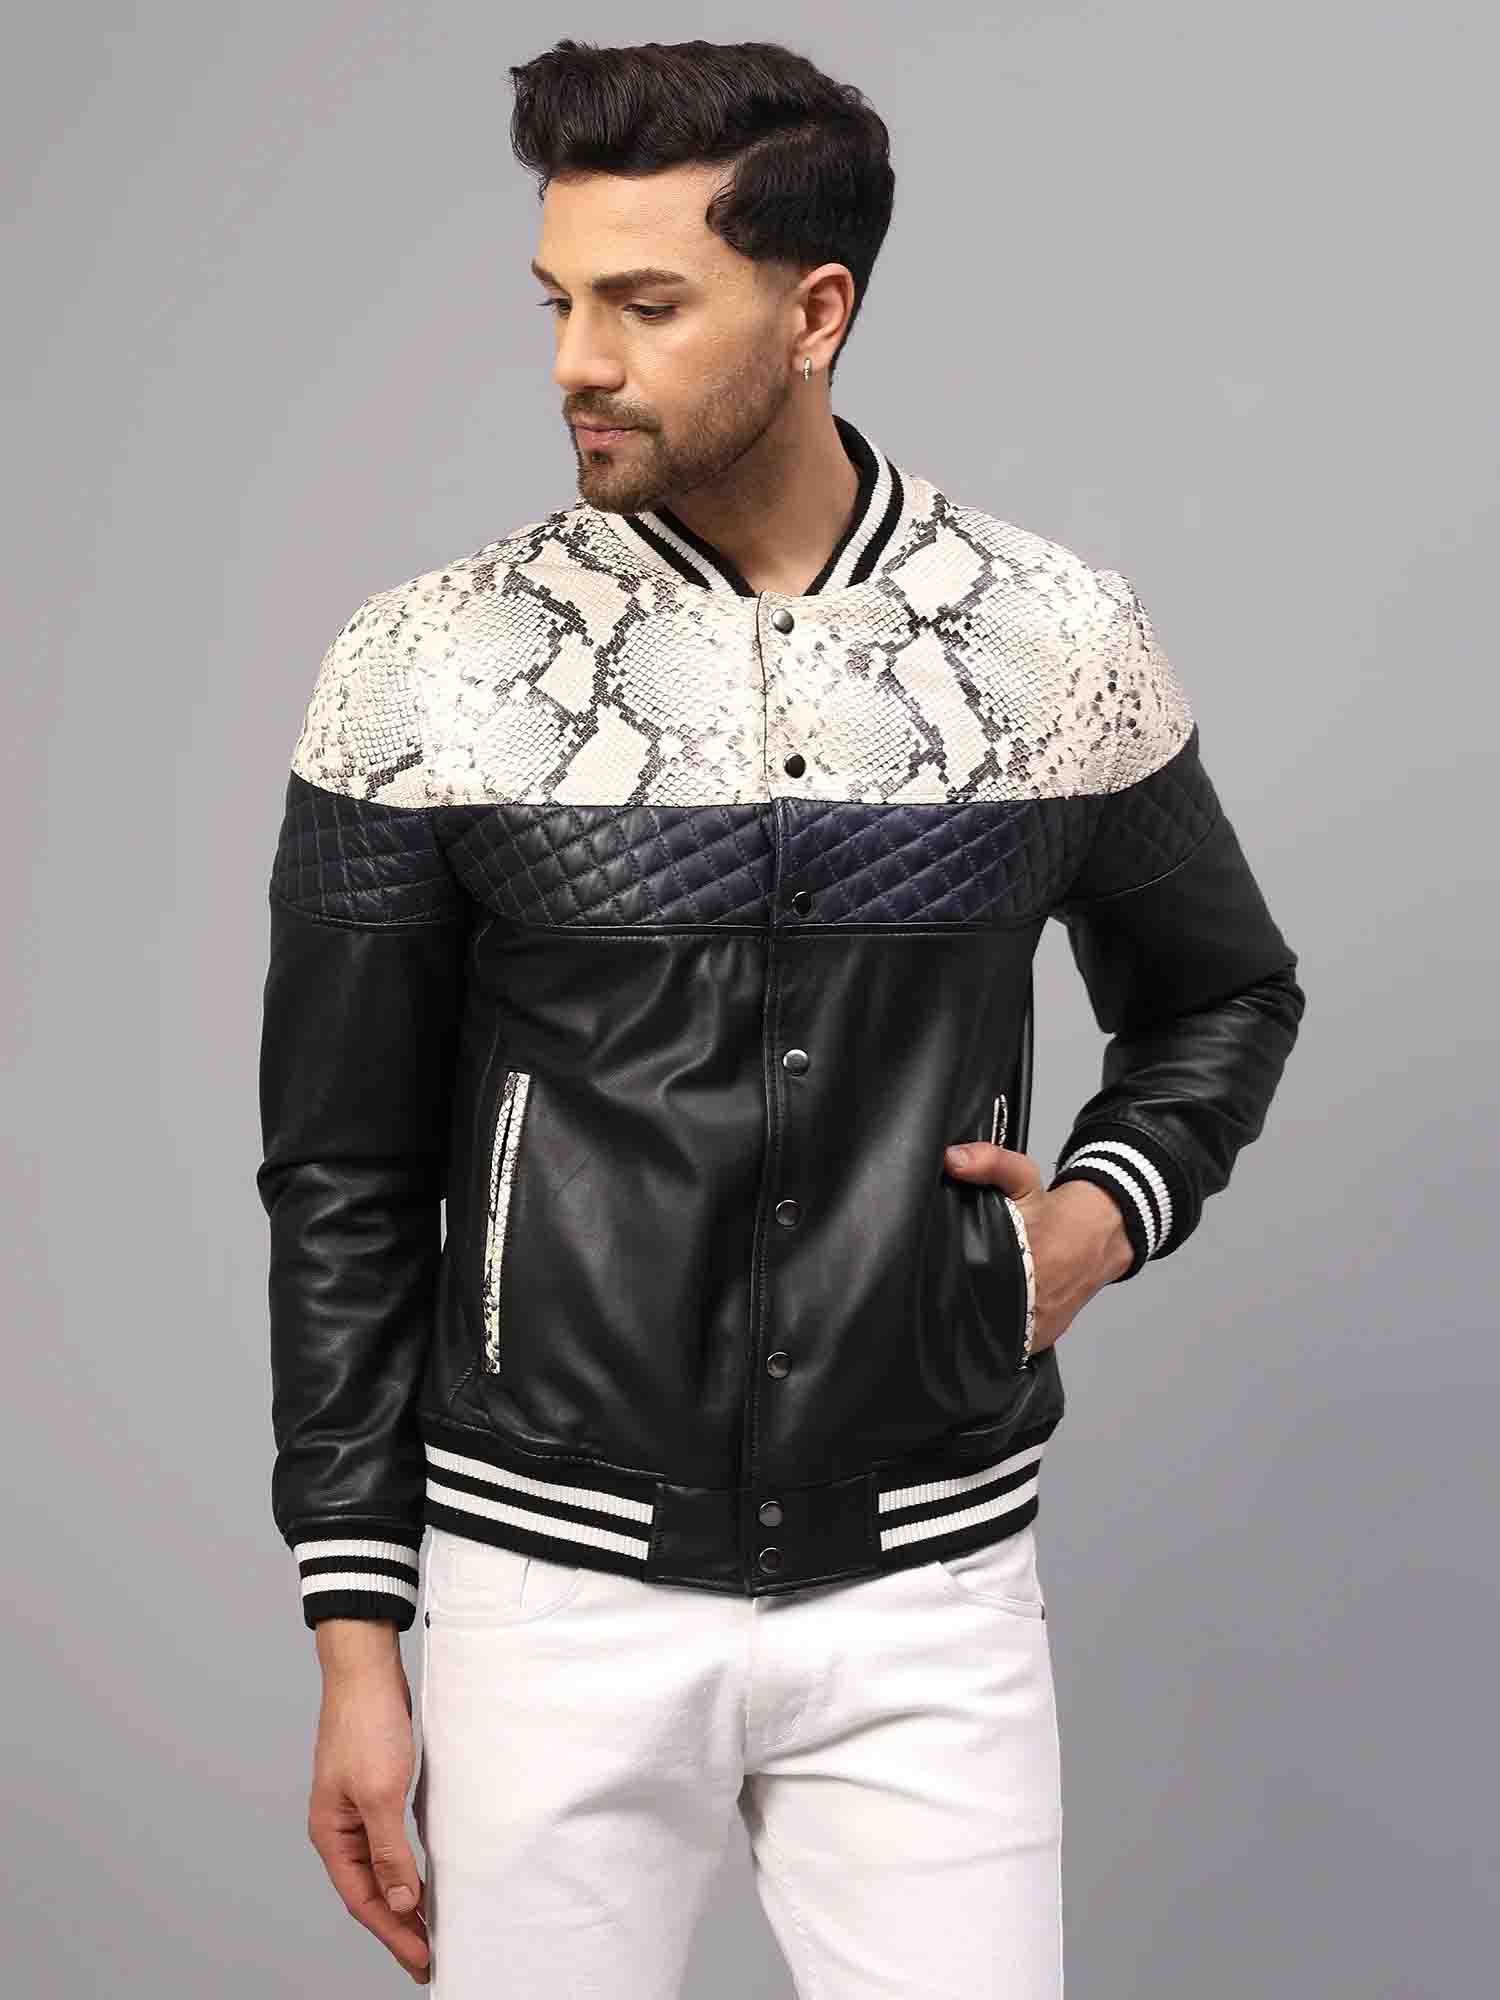 White Leather Jackets for Men & Women in Real Leather - Leather Skin Shop